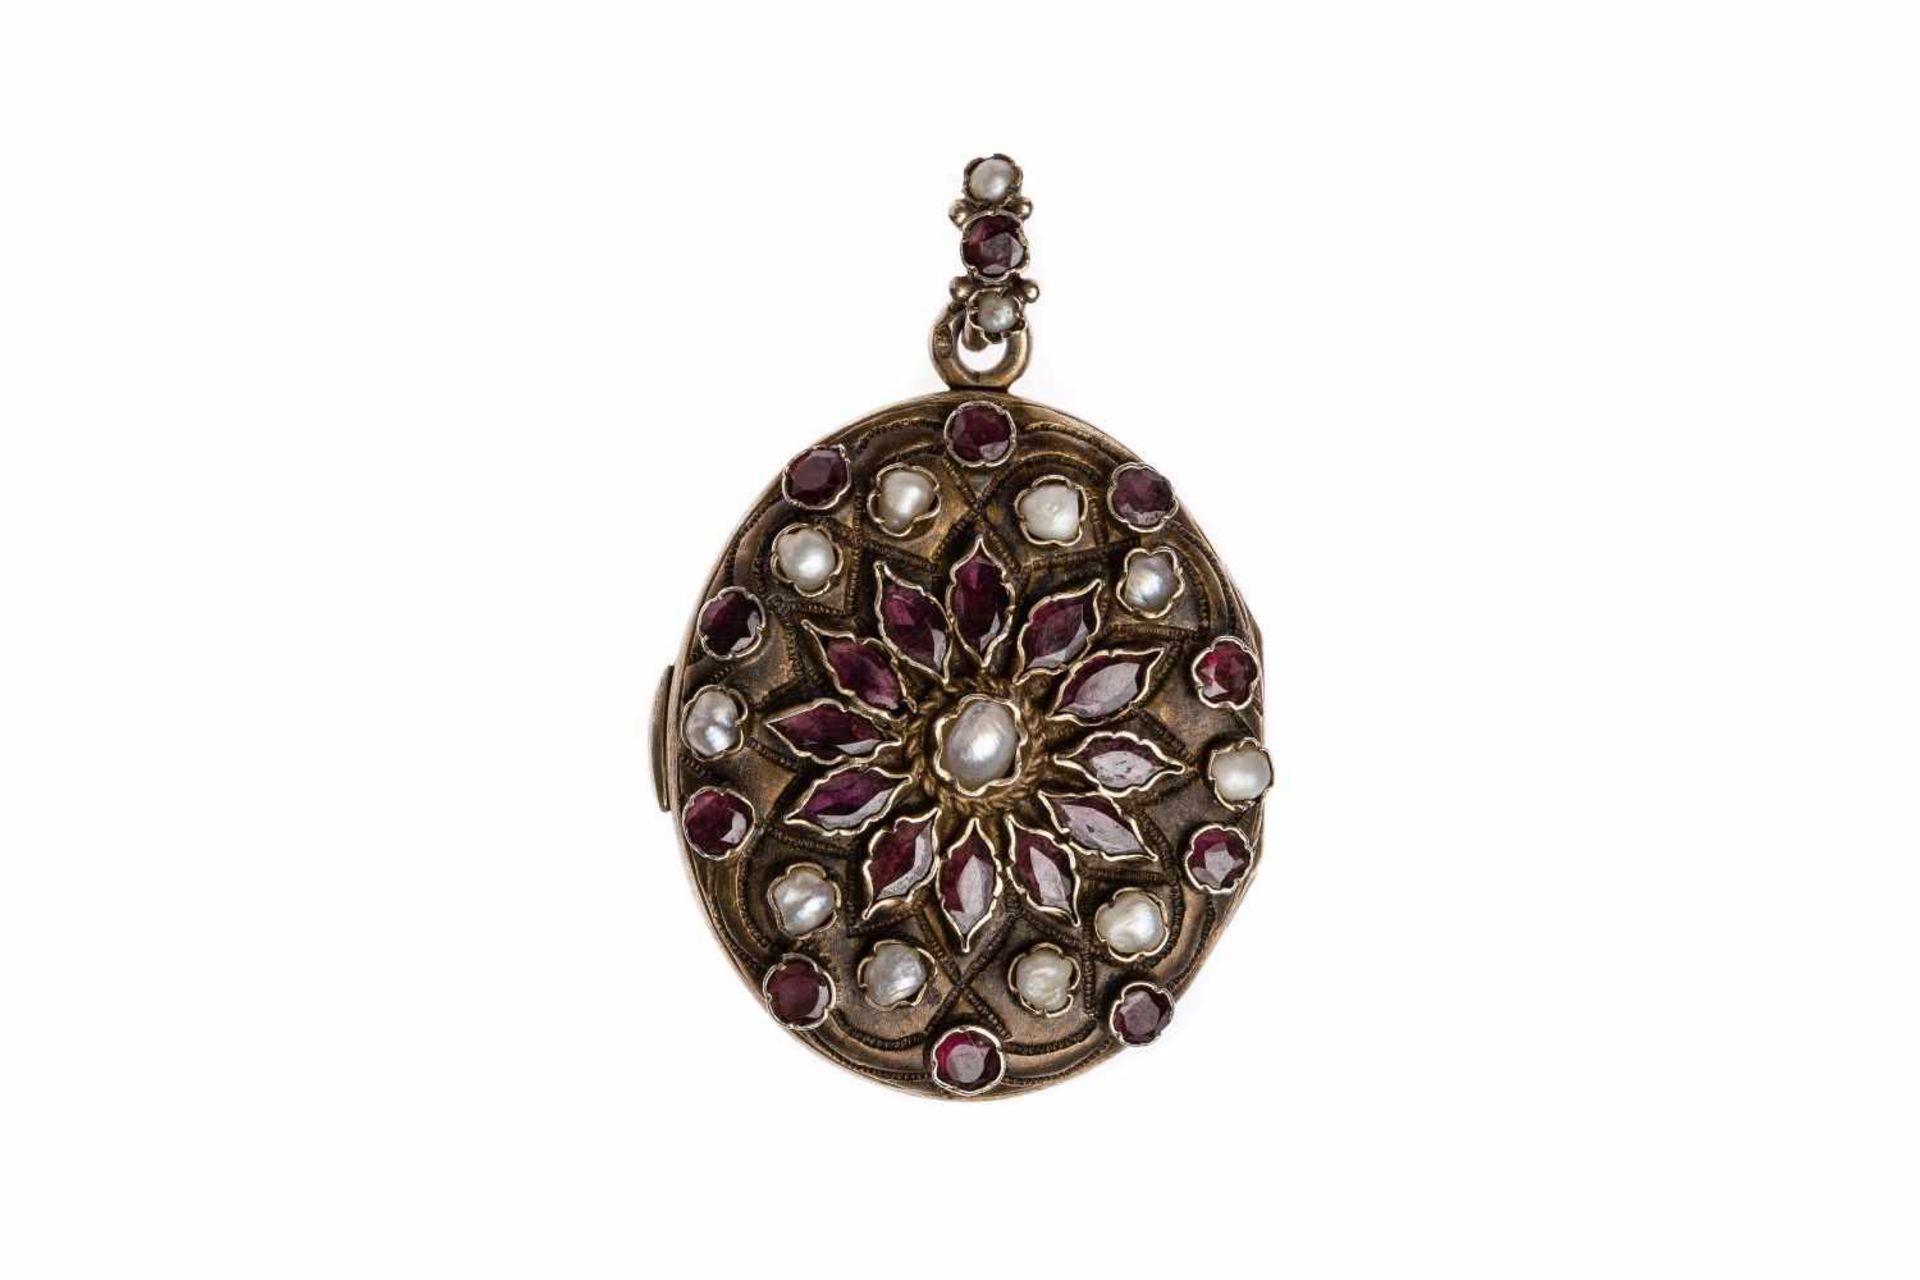 MedallionMedaillion - silver, partially gilded, with garnets and pearls, "Neorenaissance Austria-